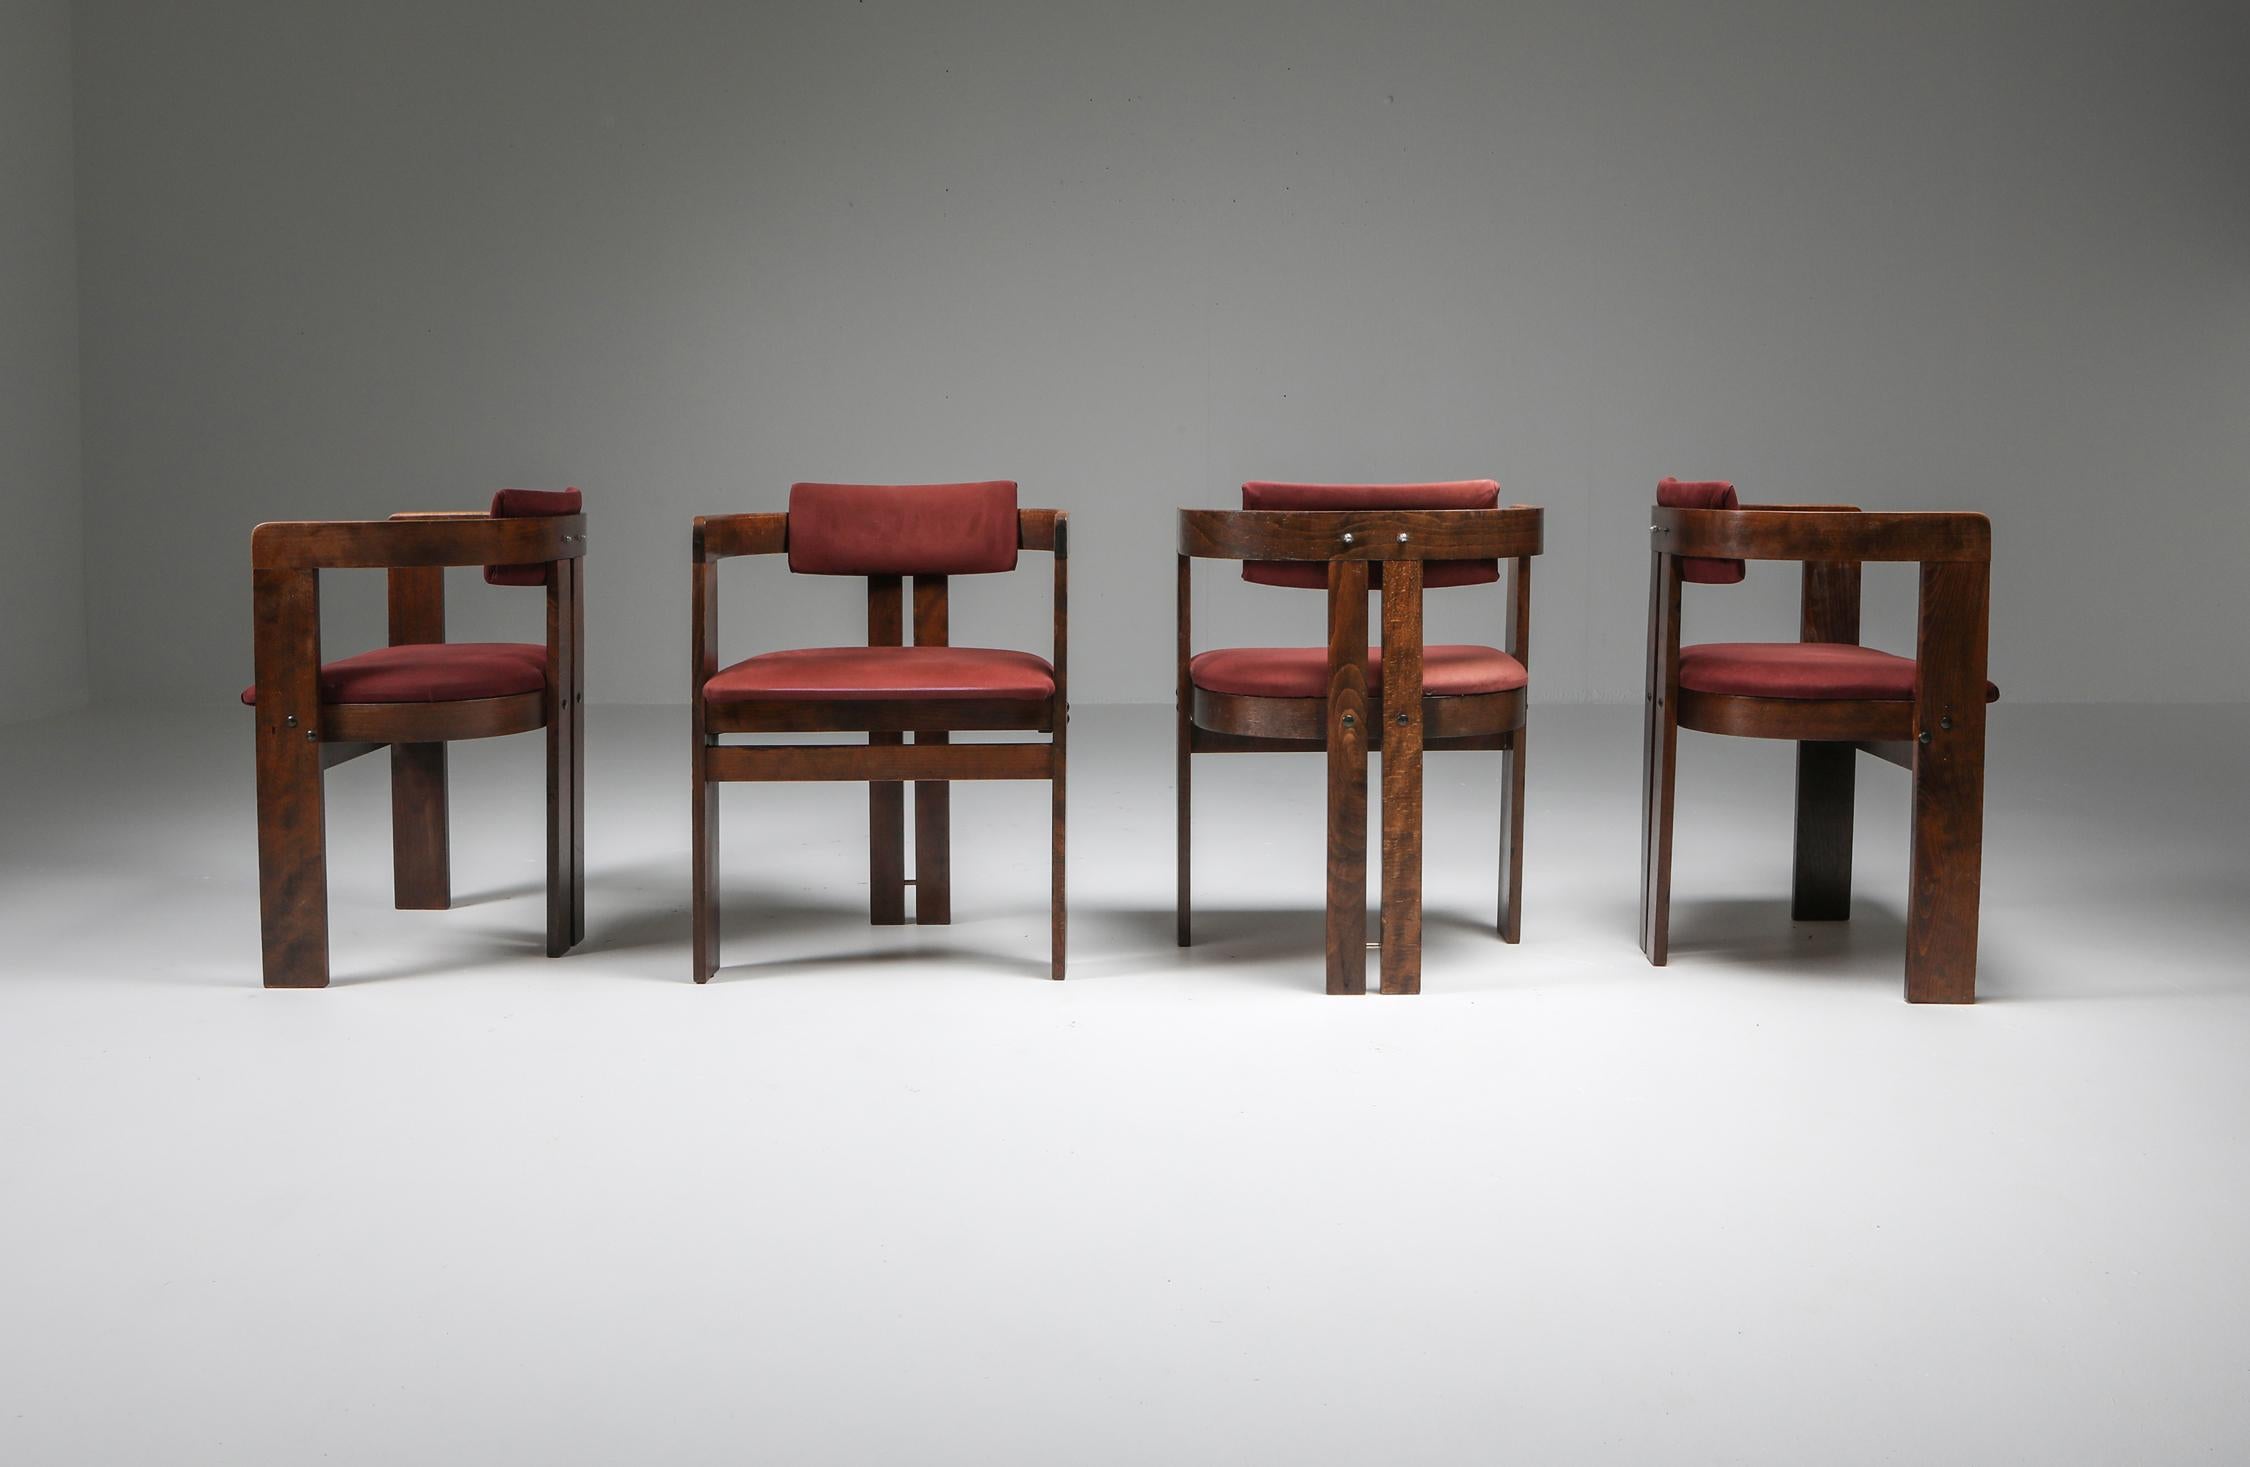 Afra and Tobia Scarpa, Pigreco, bentwood dining chairs, Italy, 1960s.

This set of four Italian dining chairs has a strong resemblance to Augusto Savini's 'Pamplona' chair (1965) 

Special reupholstery requests can be done. We guarantee a very